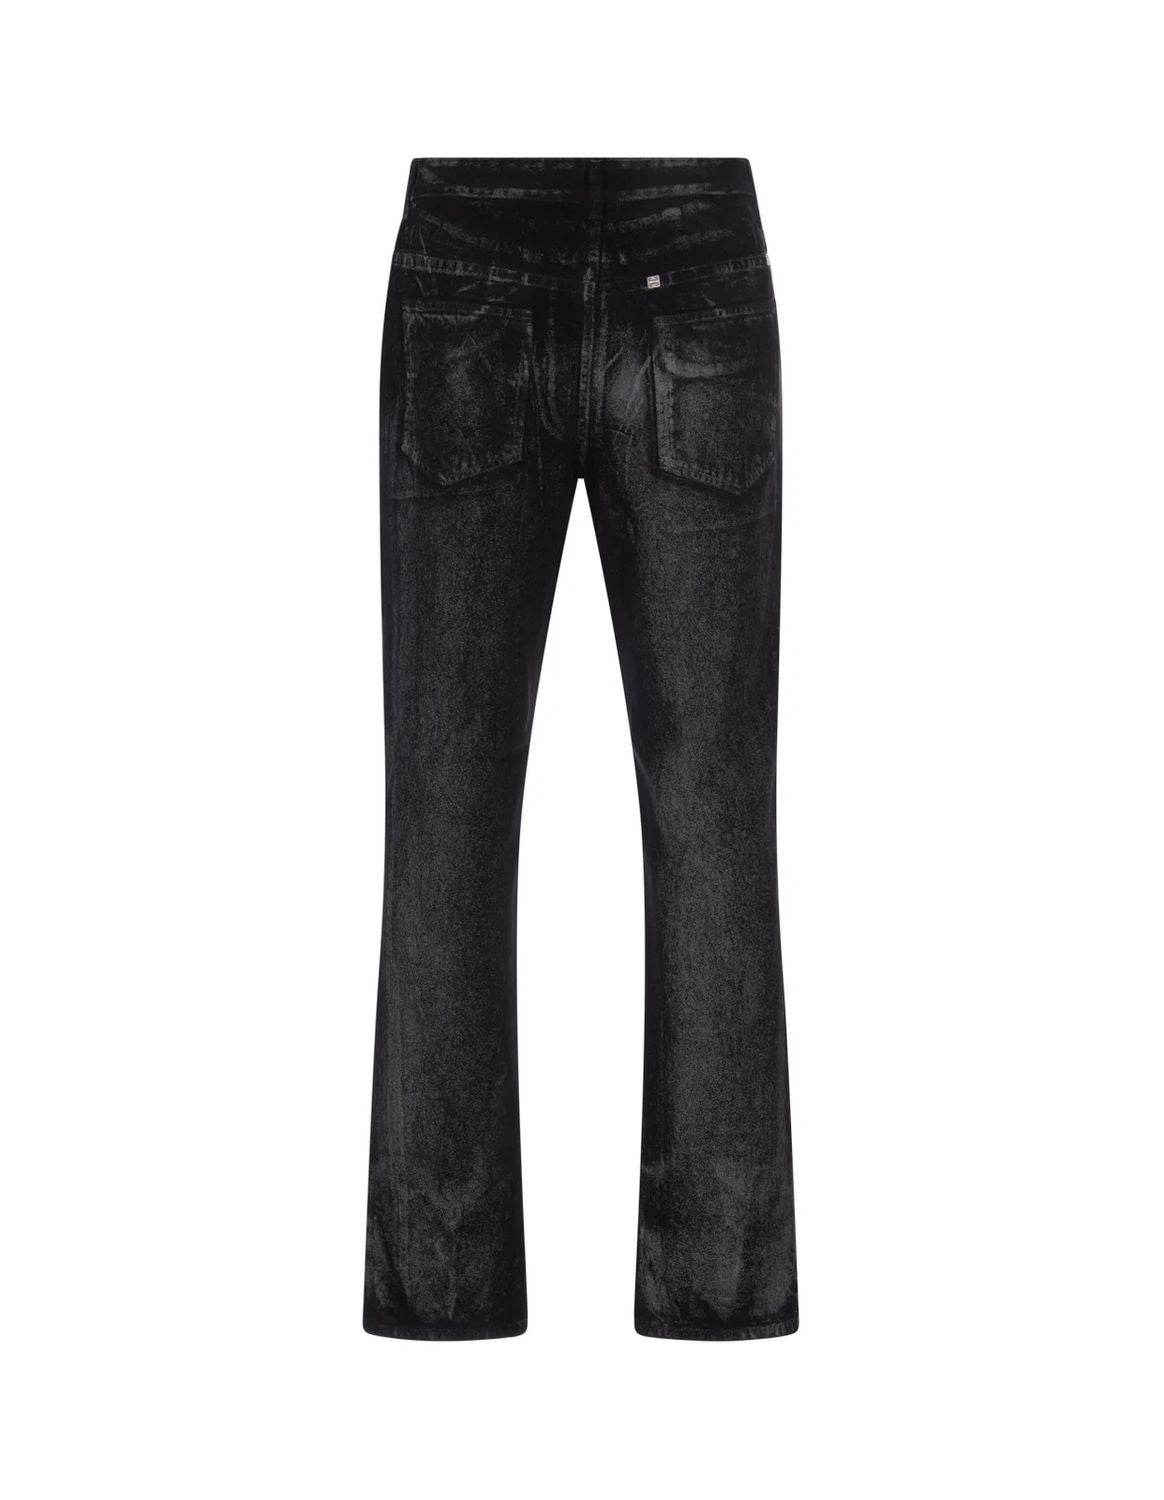 GIVENCHY Classic Black Straight Fit 5 Pocket Trousers for Men